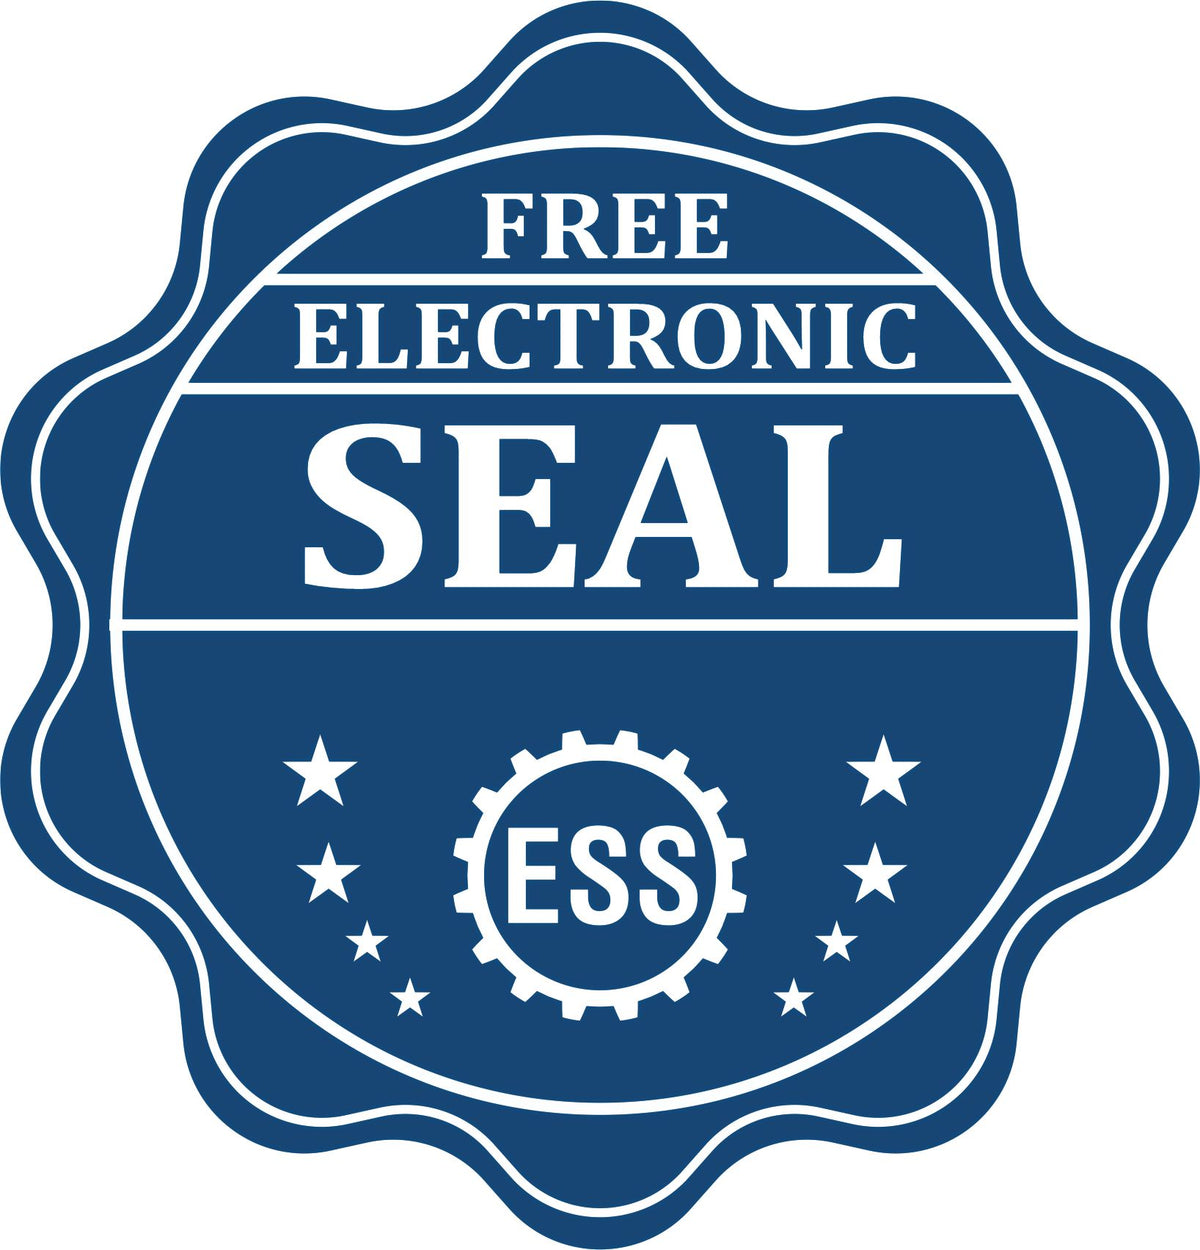 A badge showing a free electronic seal for the Soft Georgia Professional Engineer Seal with stars and the ESS gear on the emblem.